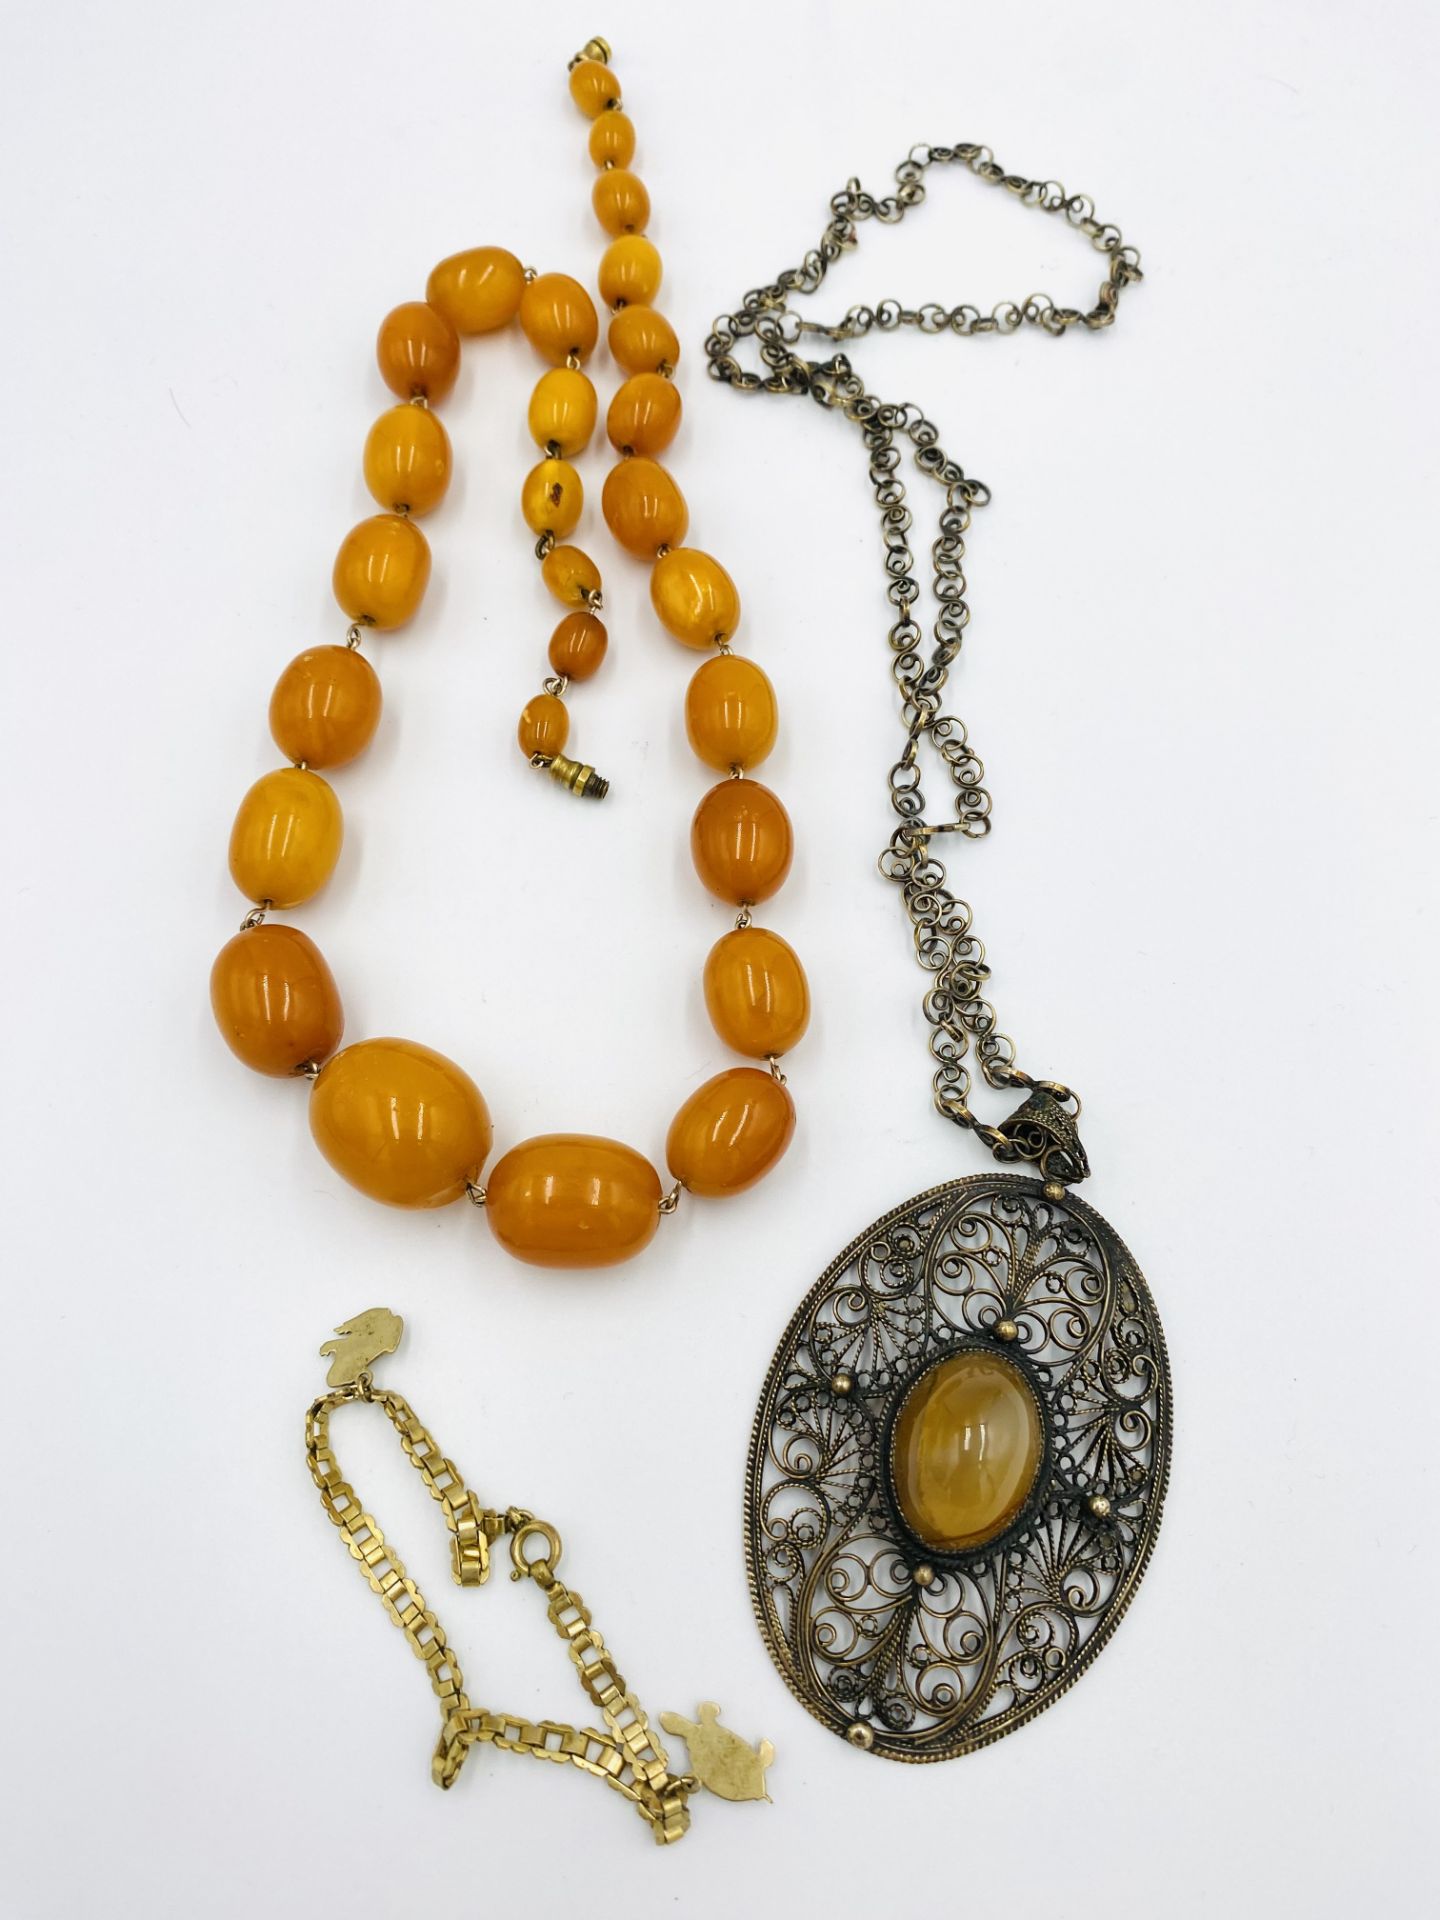 Amber bead necklace; filigree pendant necklace and a child's charm bracelet - Image 4 of 4